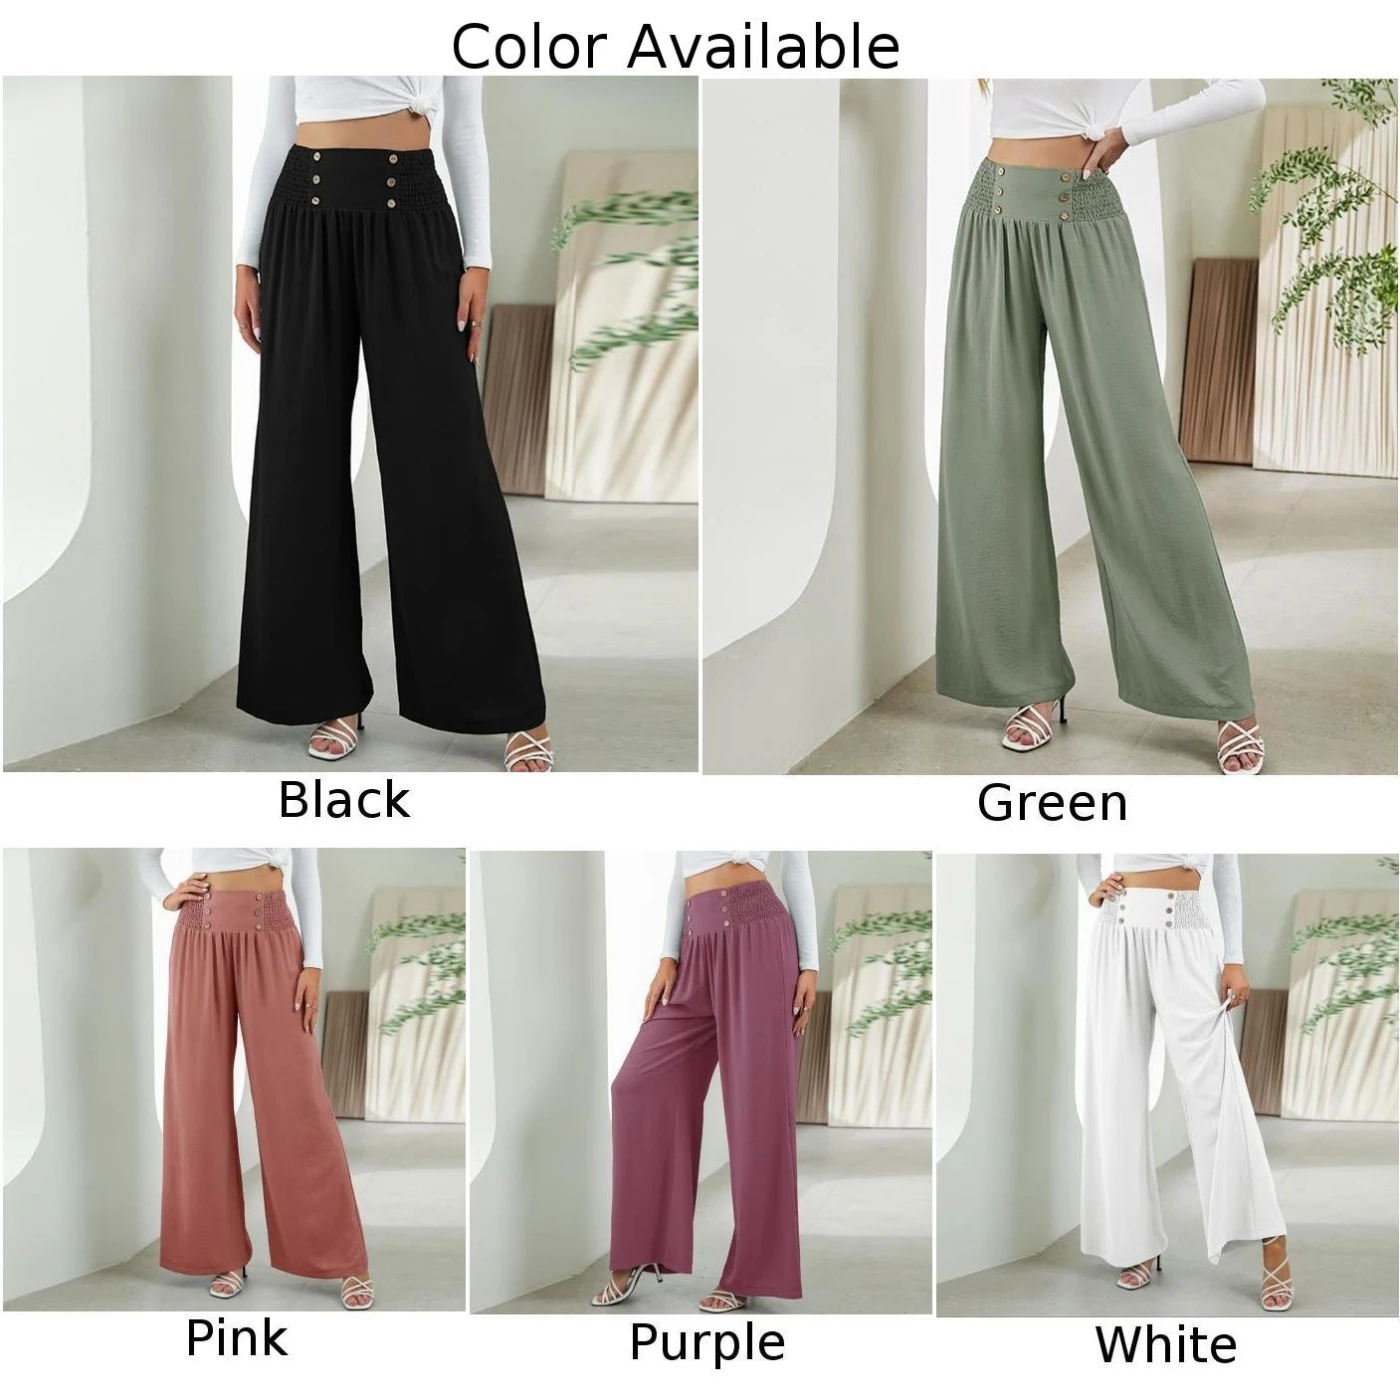 Feel Confident and Comfortable in These Women's High Waist Loose Long Pants in Soild Colors with Wide Legs and Elastic Waist